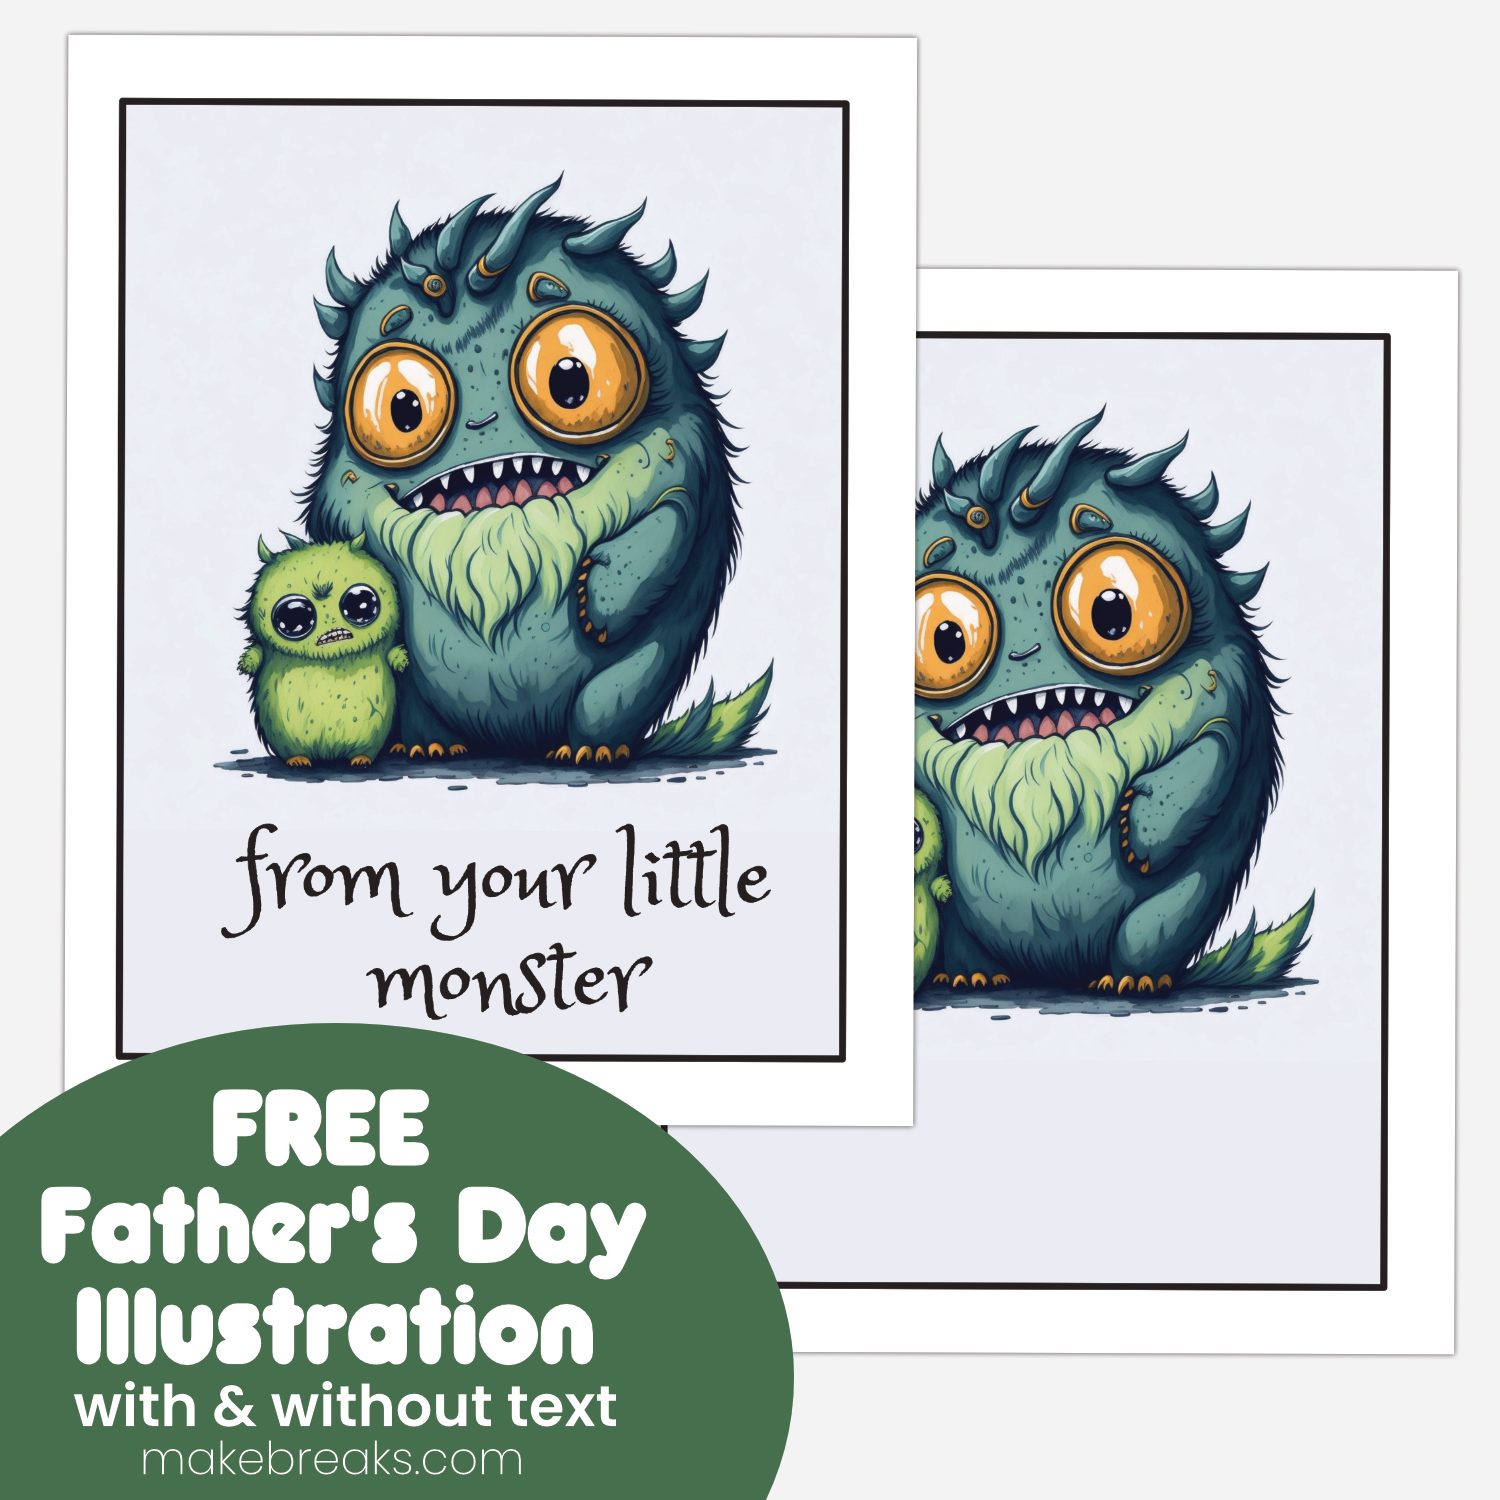 Free Printable Father’s Day Illustration – From Your Little Monster